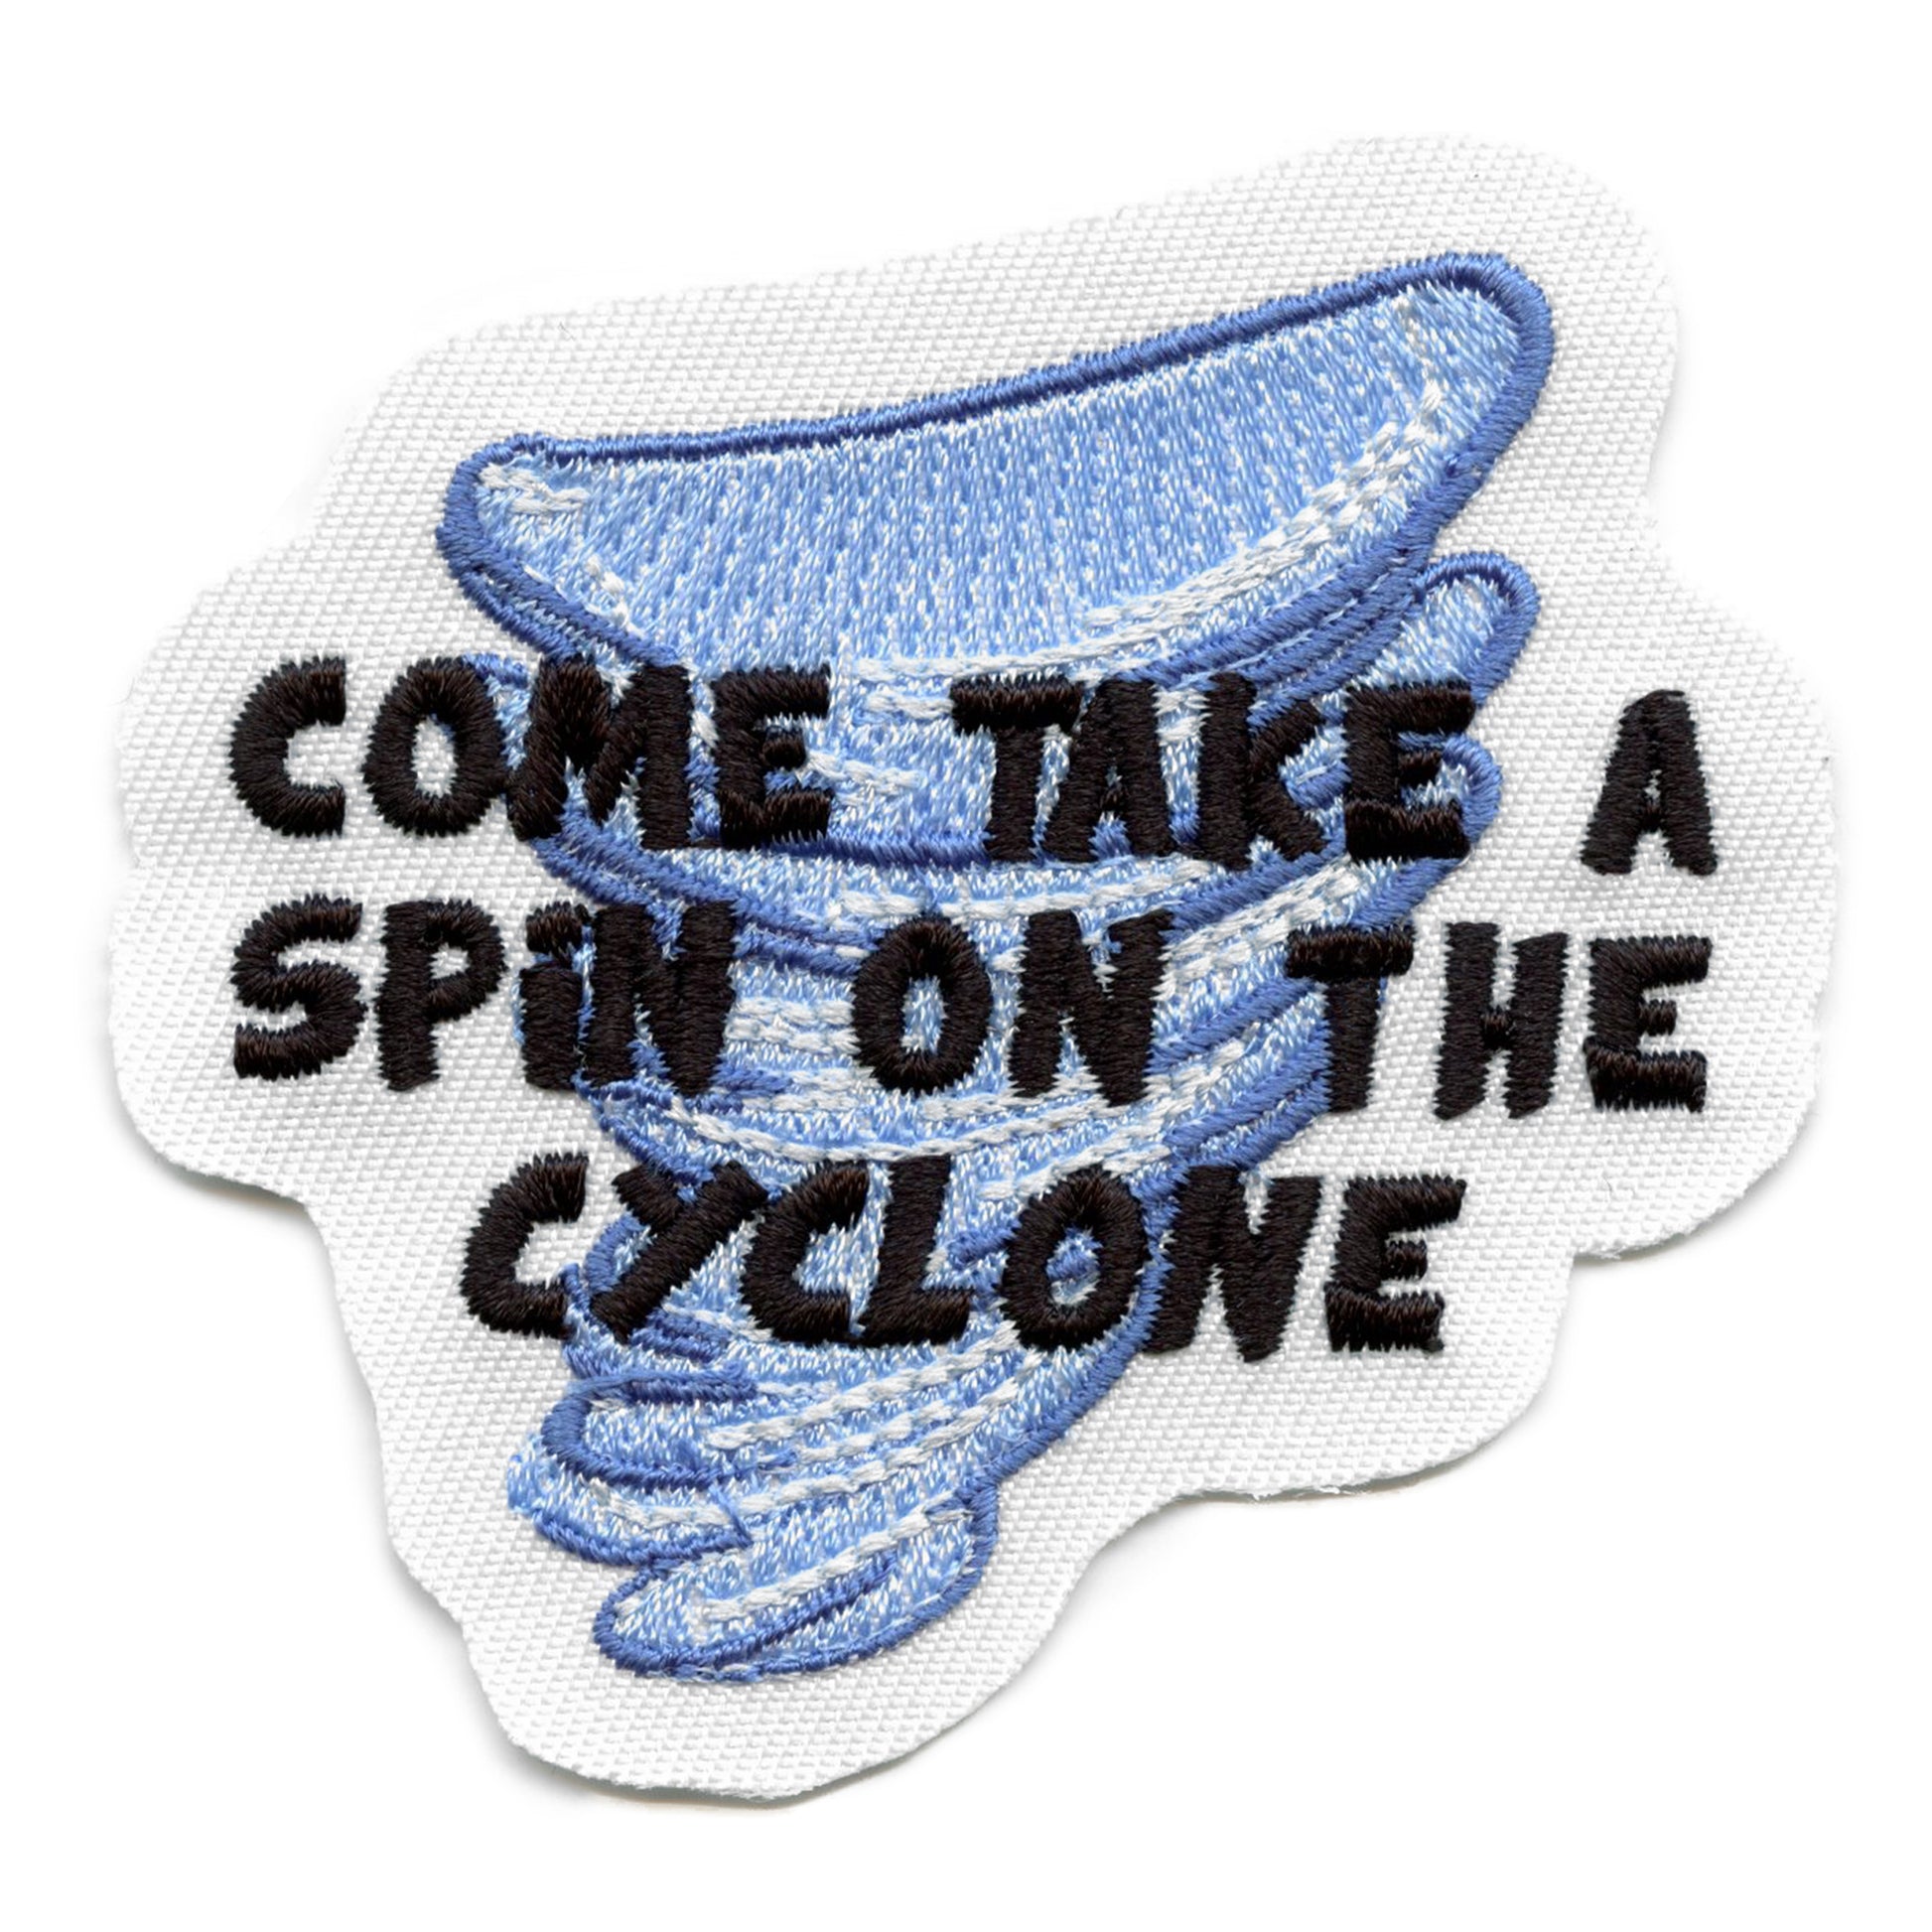 Come Take a Spin on the Cyclone Patch Funny Viral Meme Embroidered Iron On 